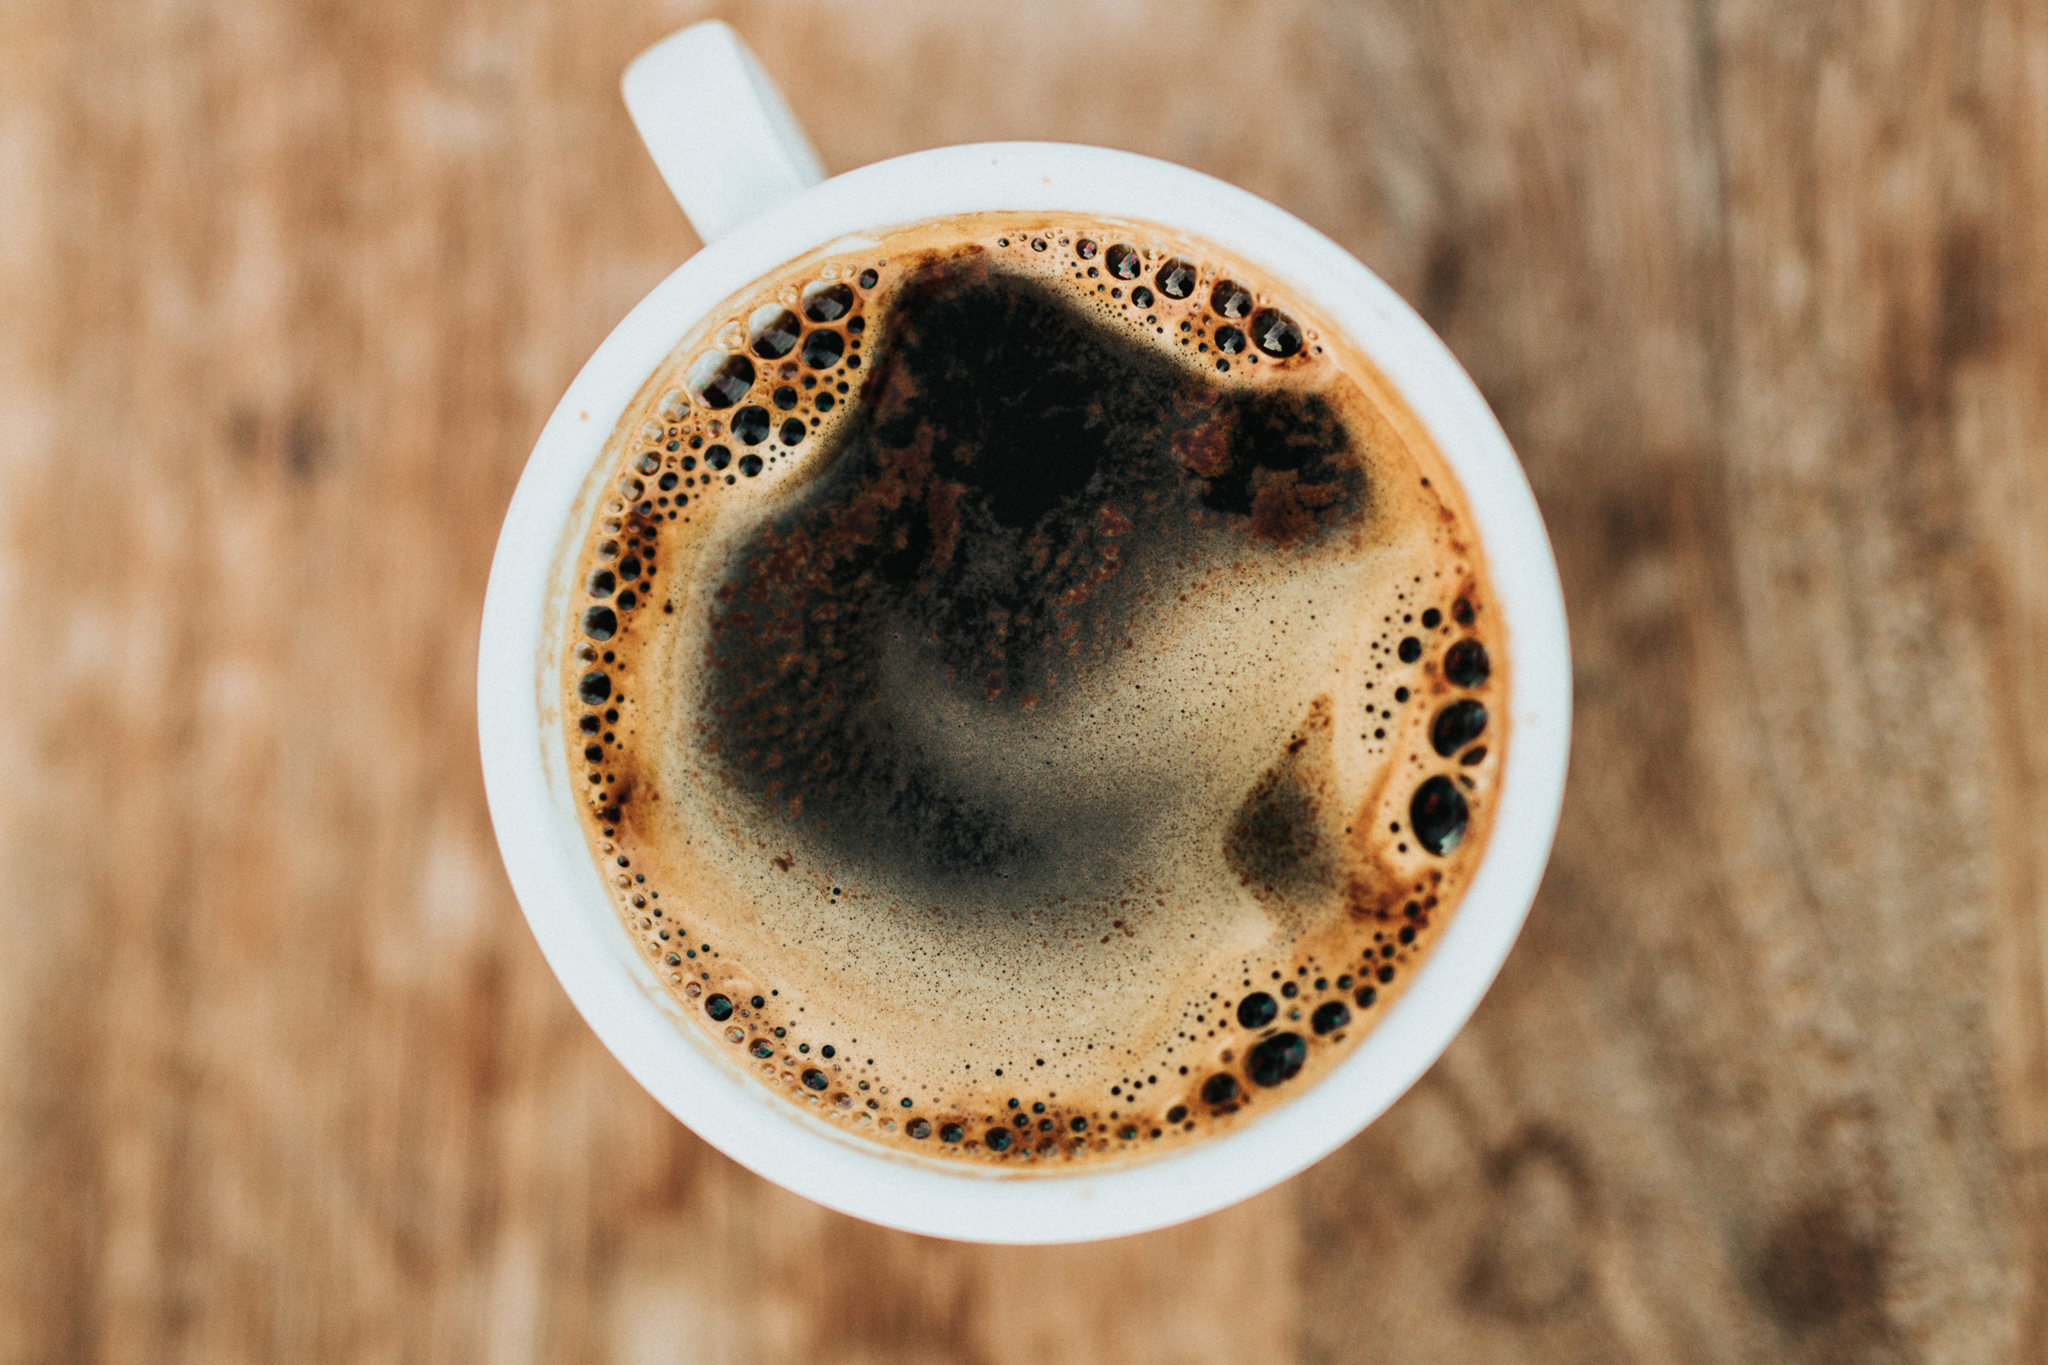 https://www.themanual.com/wp-content/uploads/sites/9/2019/12/cup-of-coffee-unsplash.jpg?fit=2048%2C1365&p=1